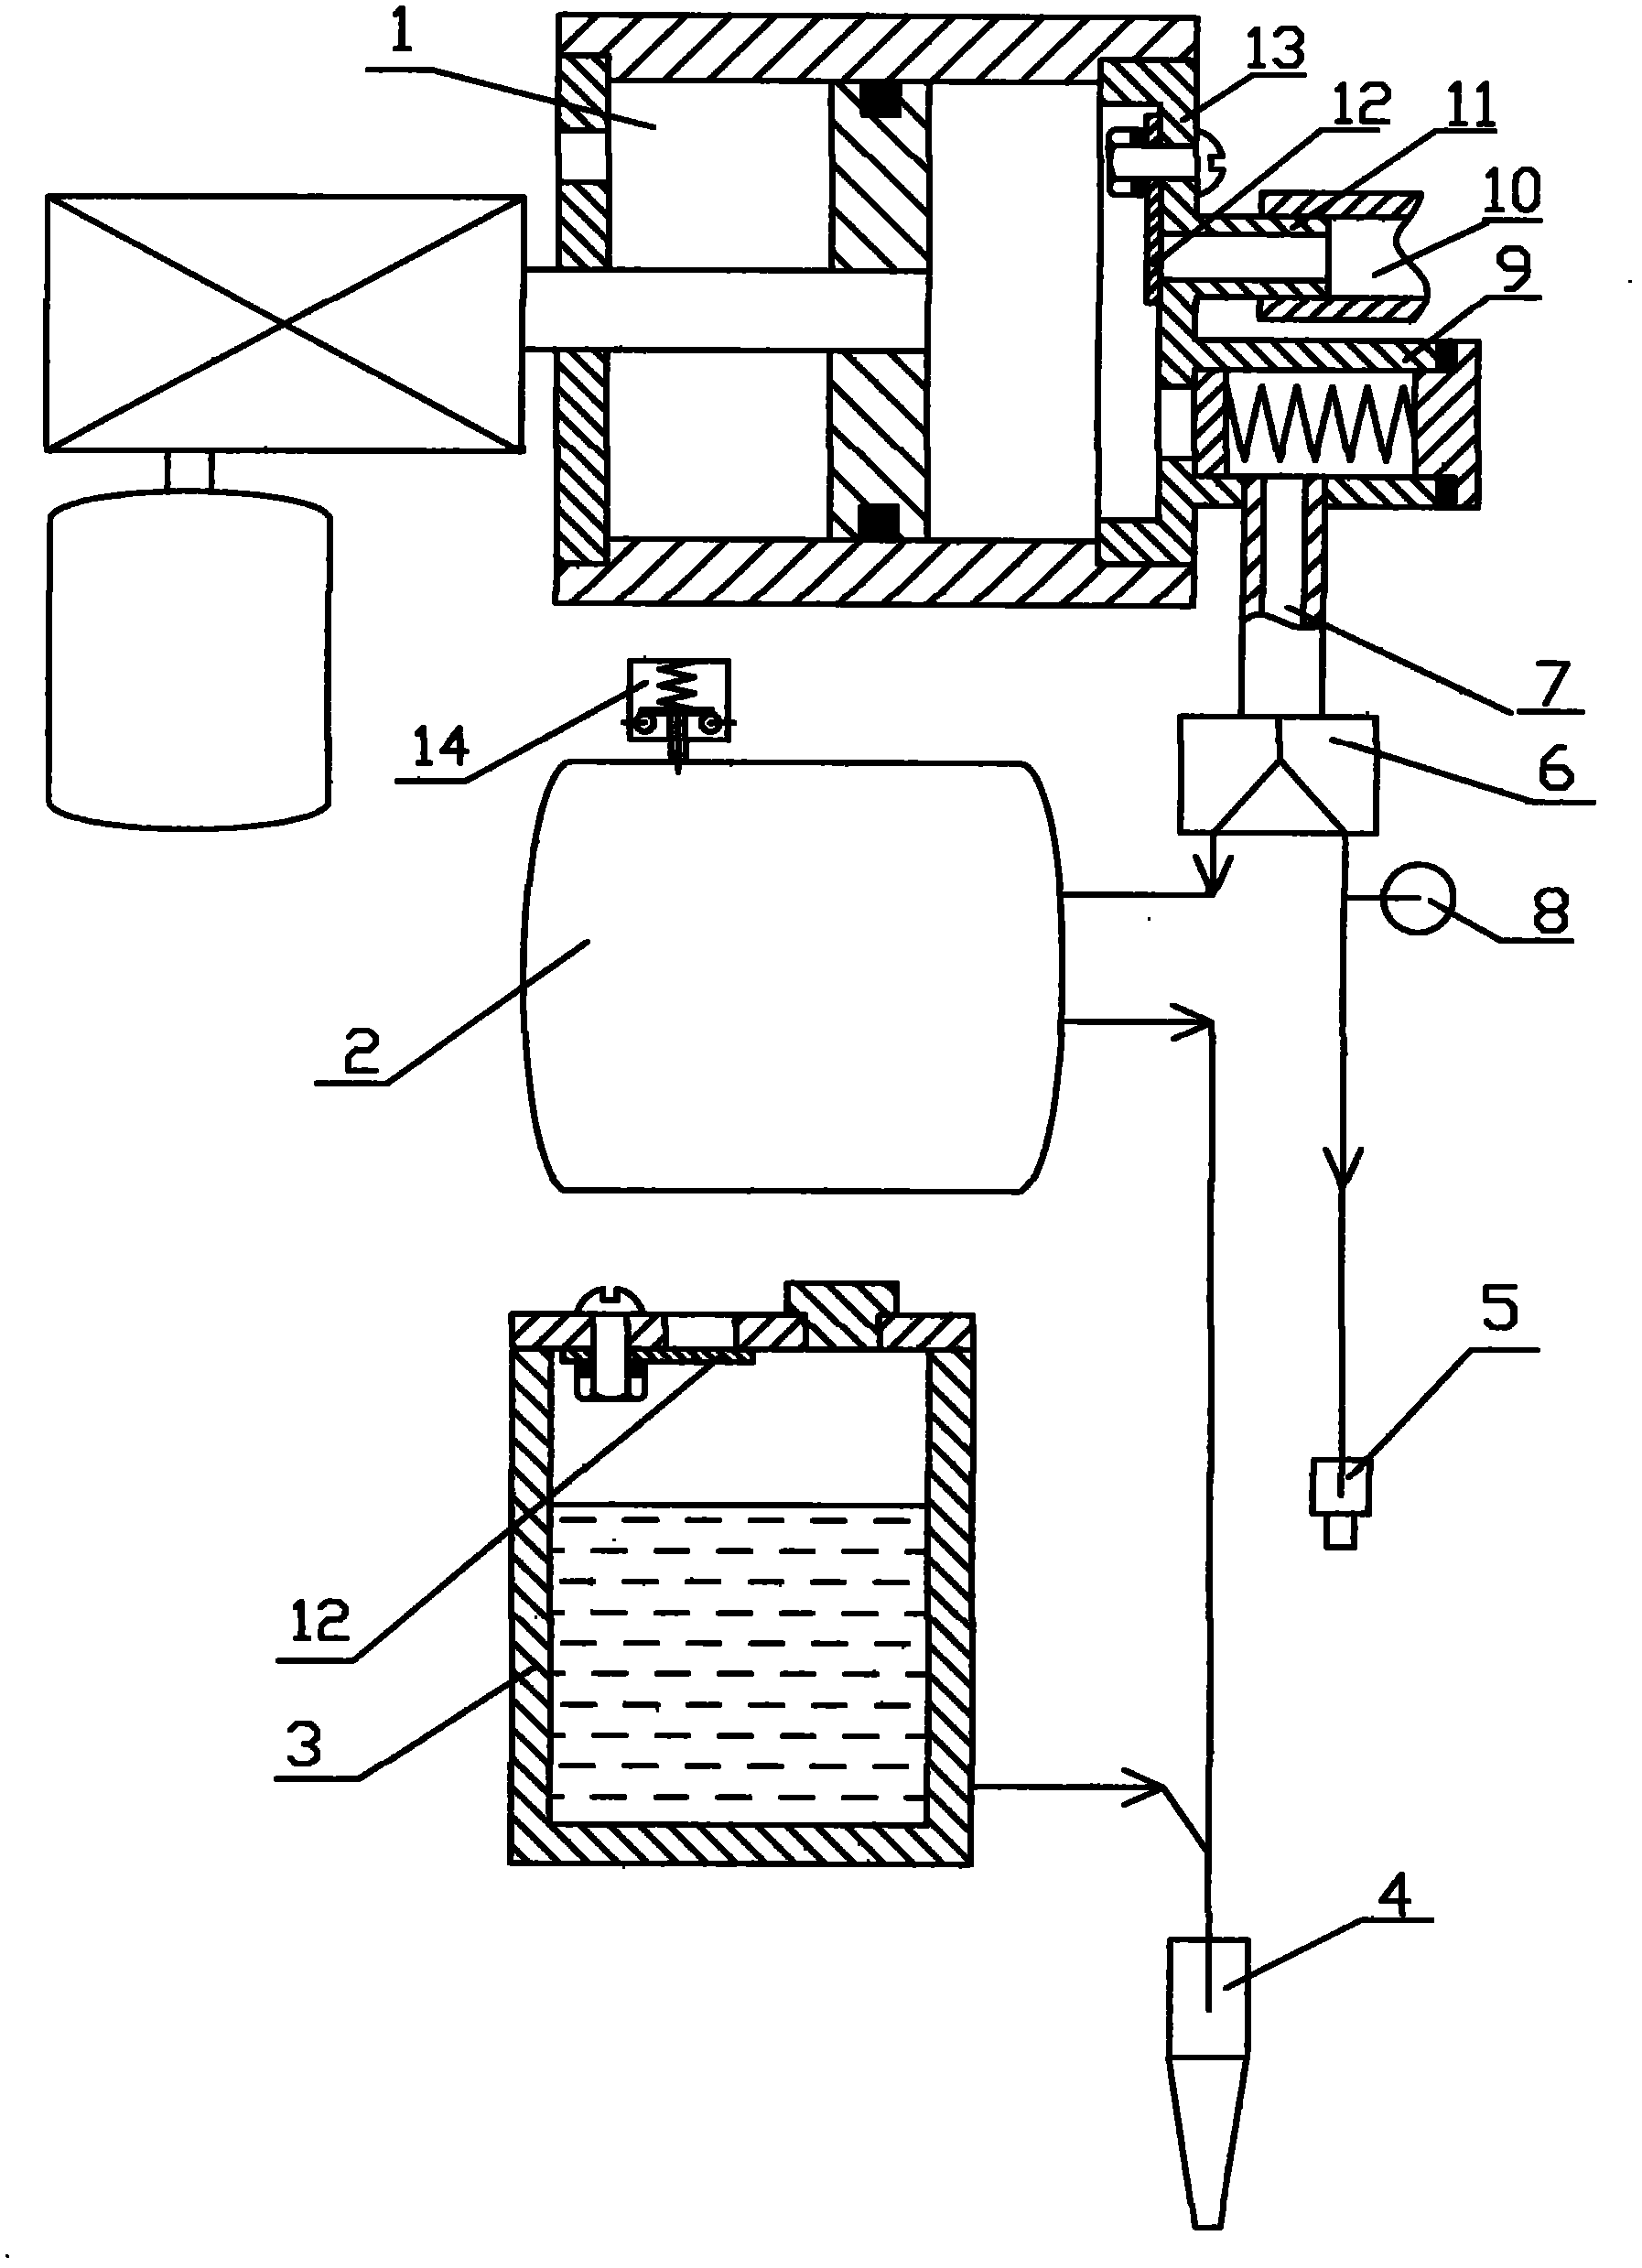 Dual-purpose device for vehicle cleaning and air inflation